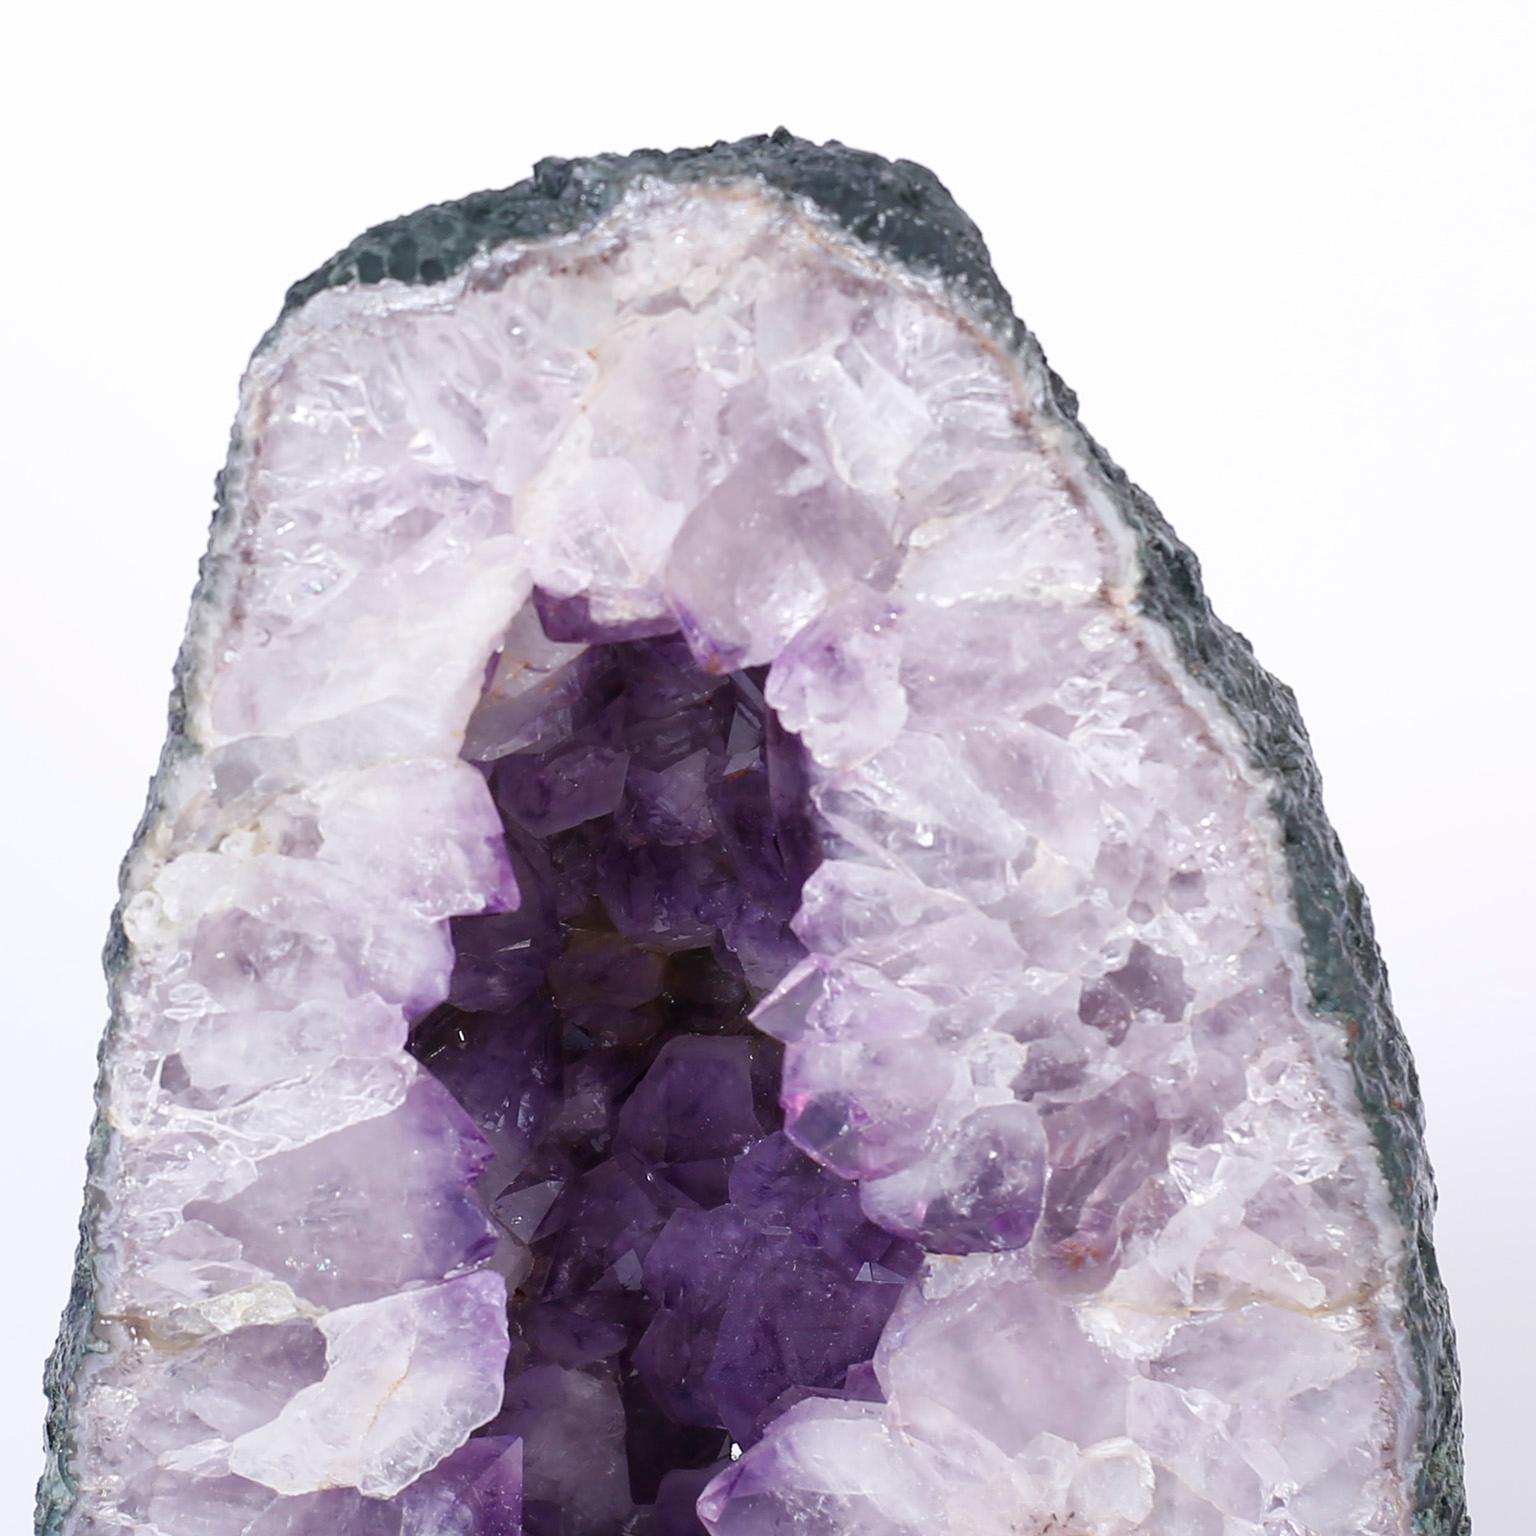 Enchanting geode specimen displaying Mother Nature's sculptural prowess with this fine example of Amethyst quartz crystals.
 